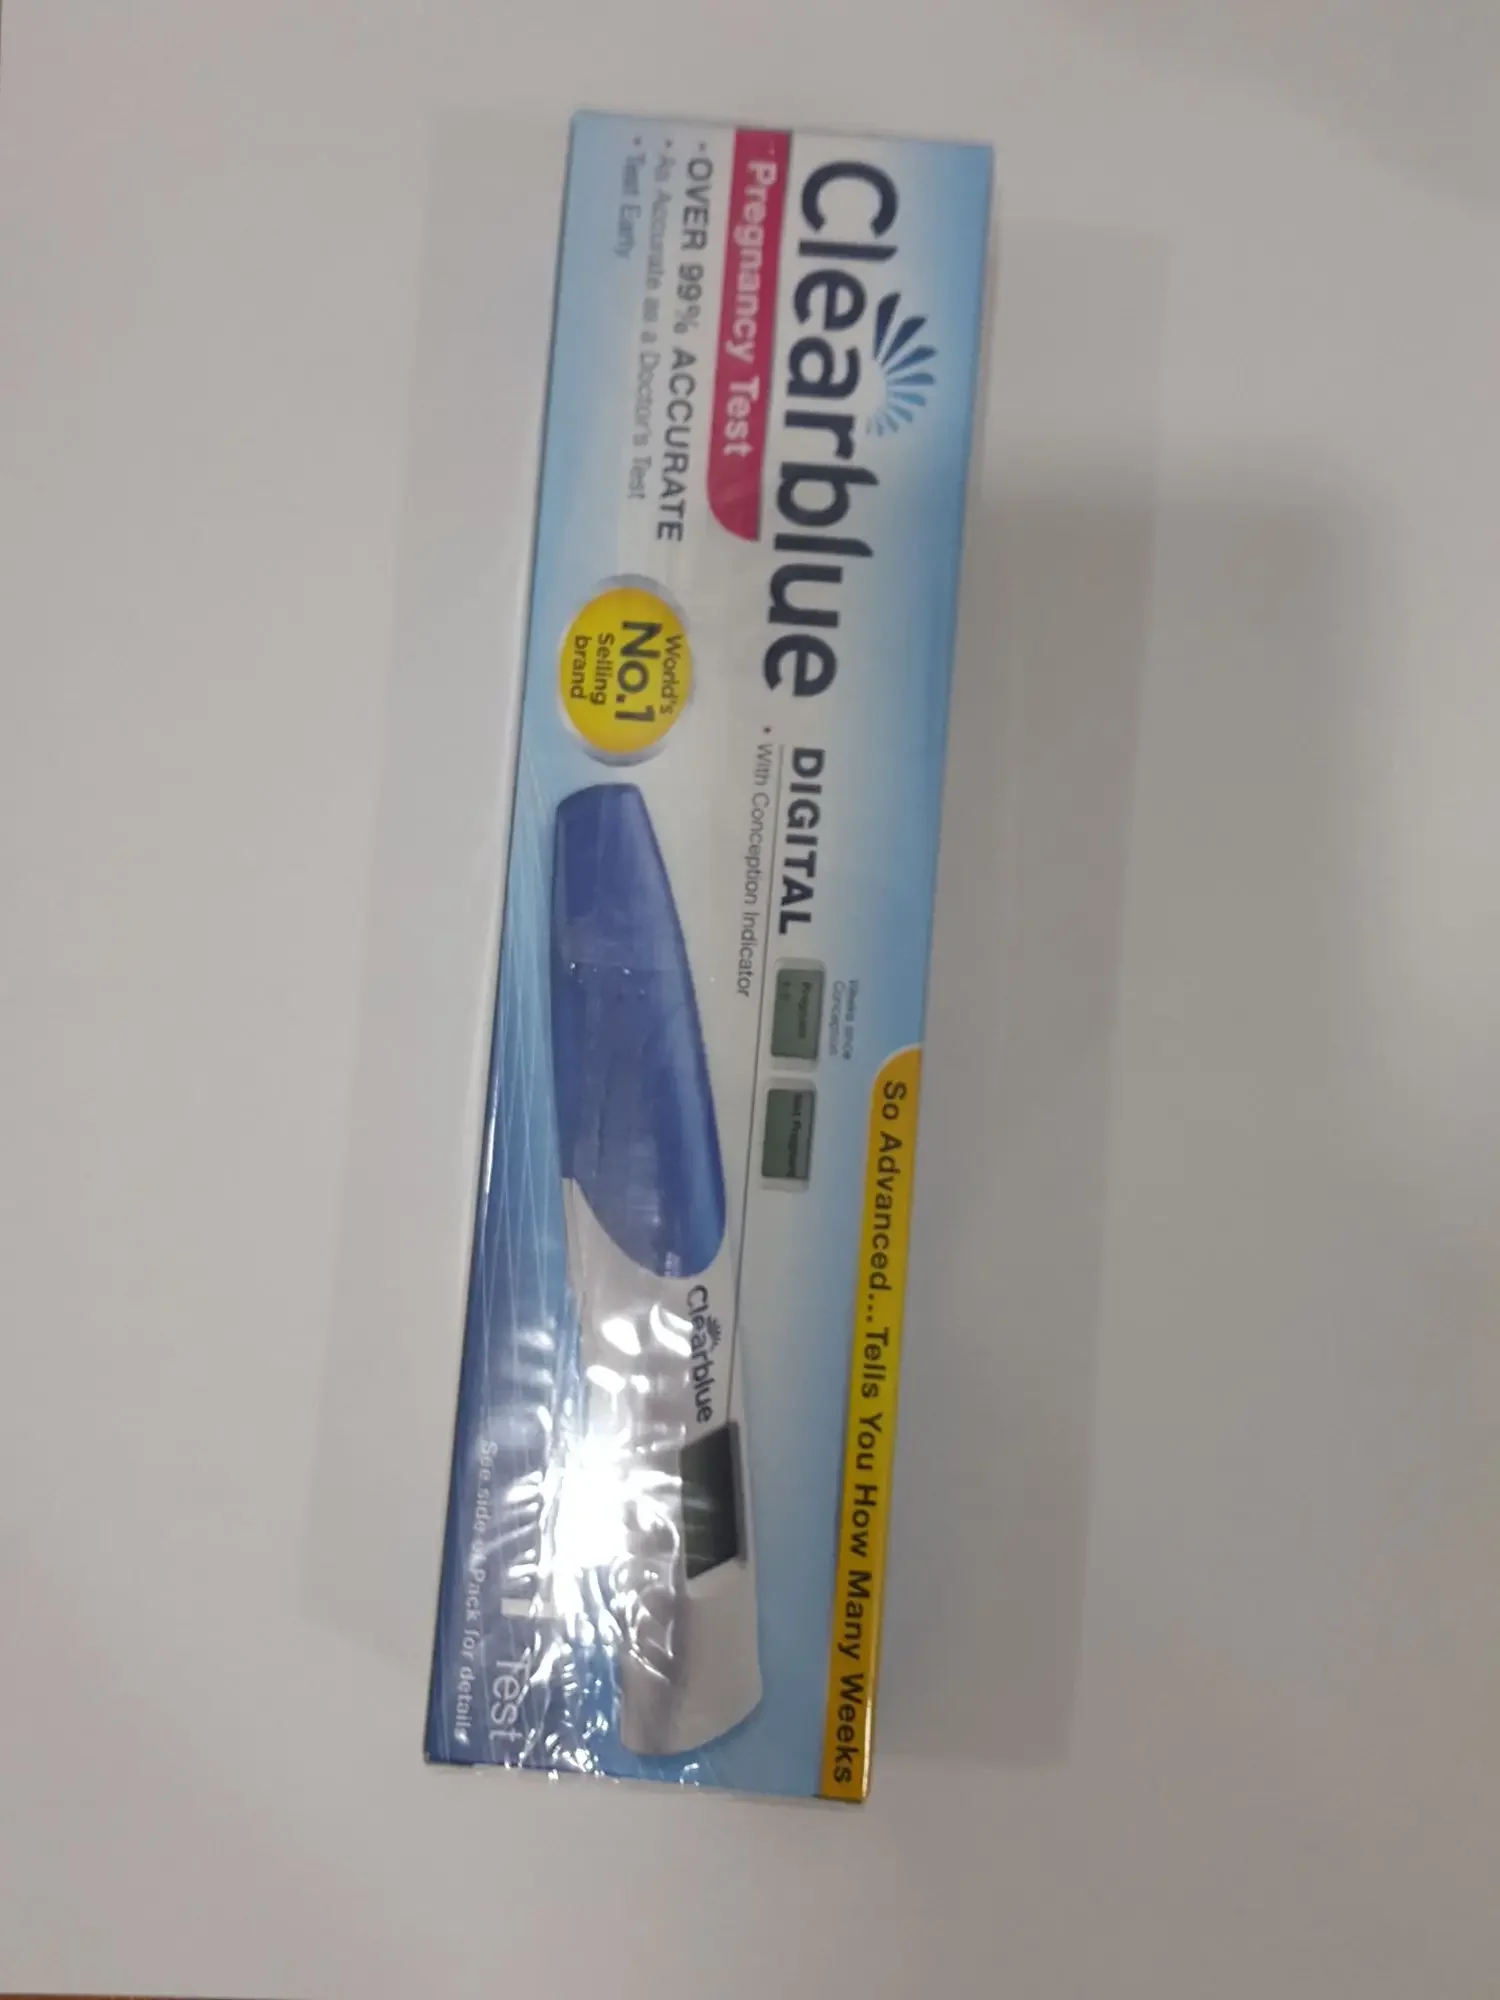 Clearblue Digital Pregnancy Test 1 Unit 99% Accurate